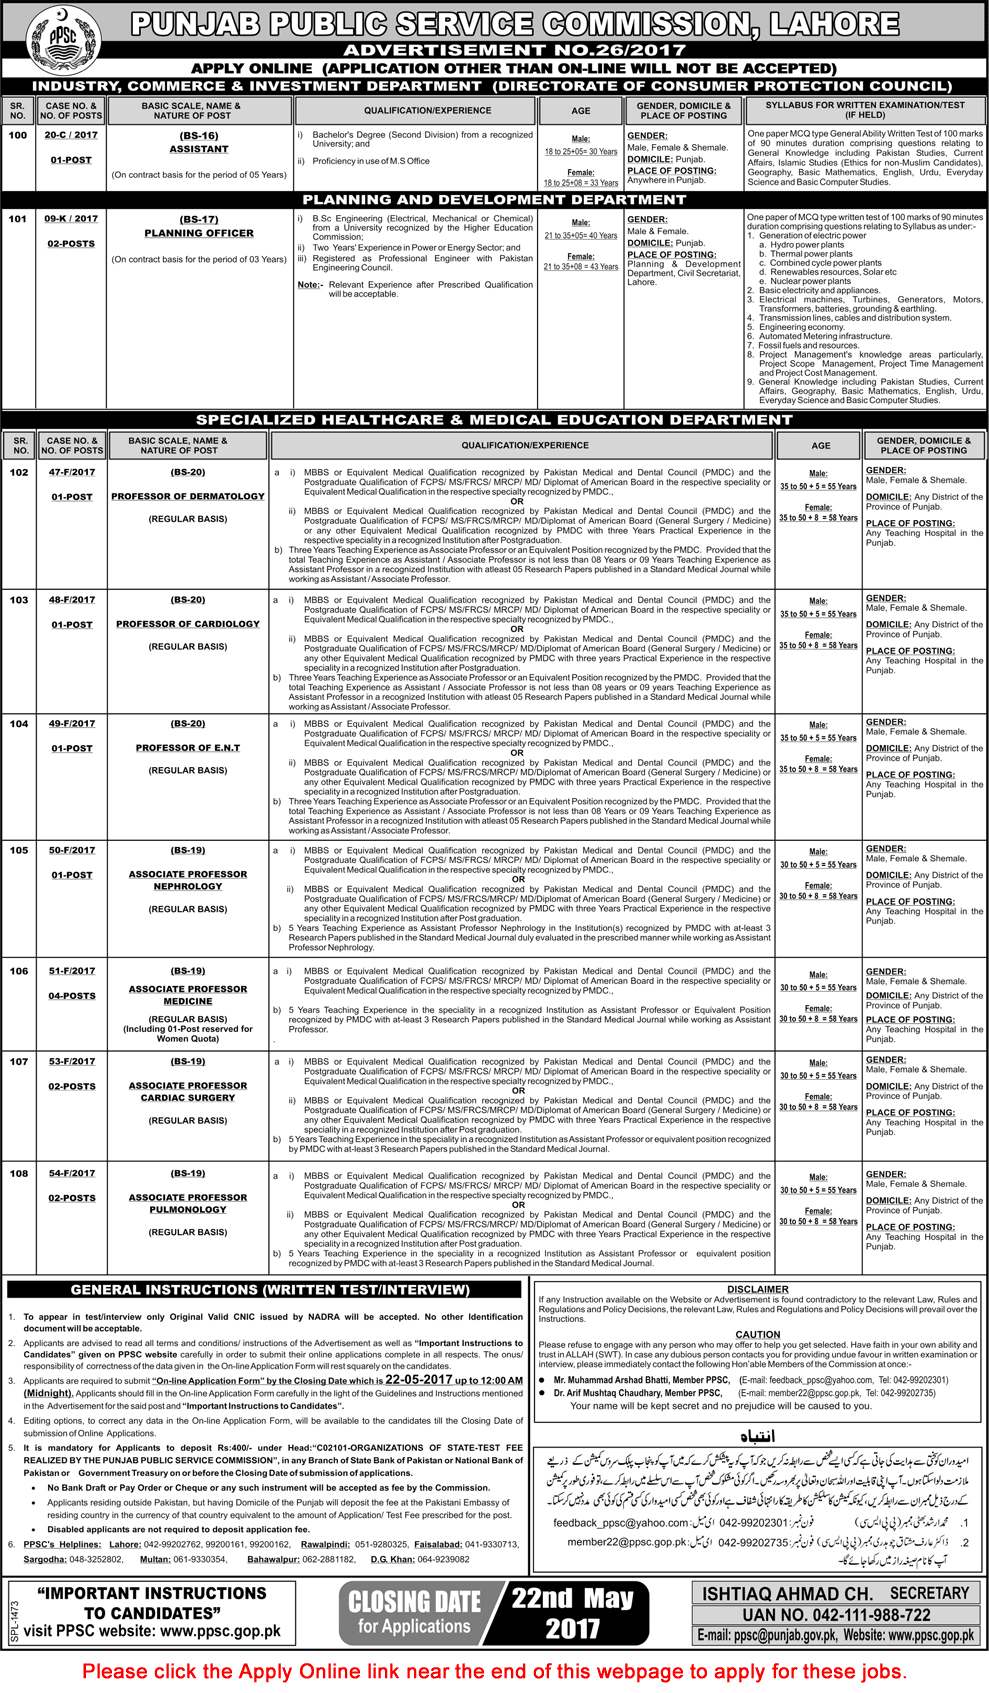 PPSC Jobs May 2017 Apply Online Consolidated Advertisement No 26/2017 Latest